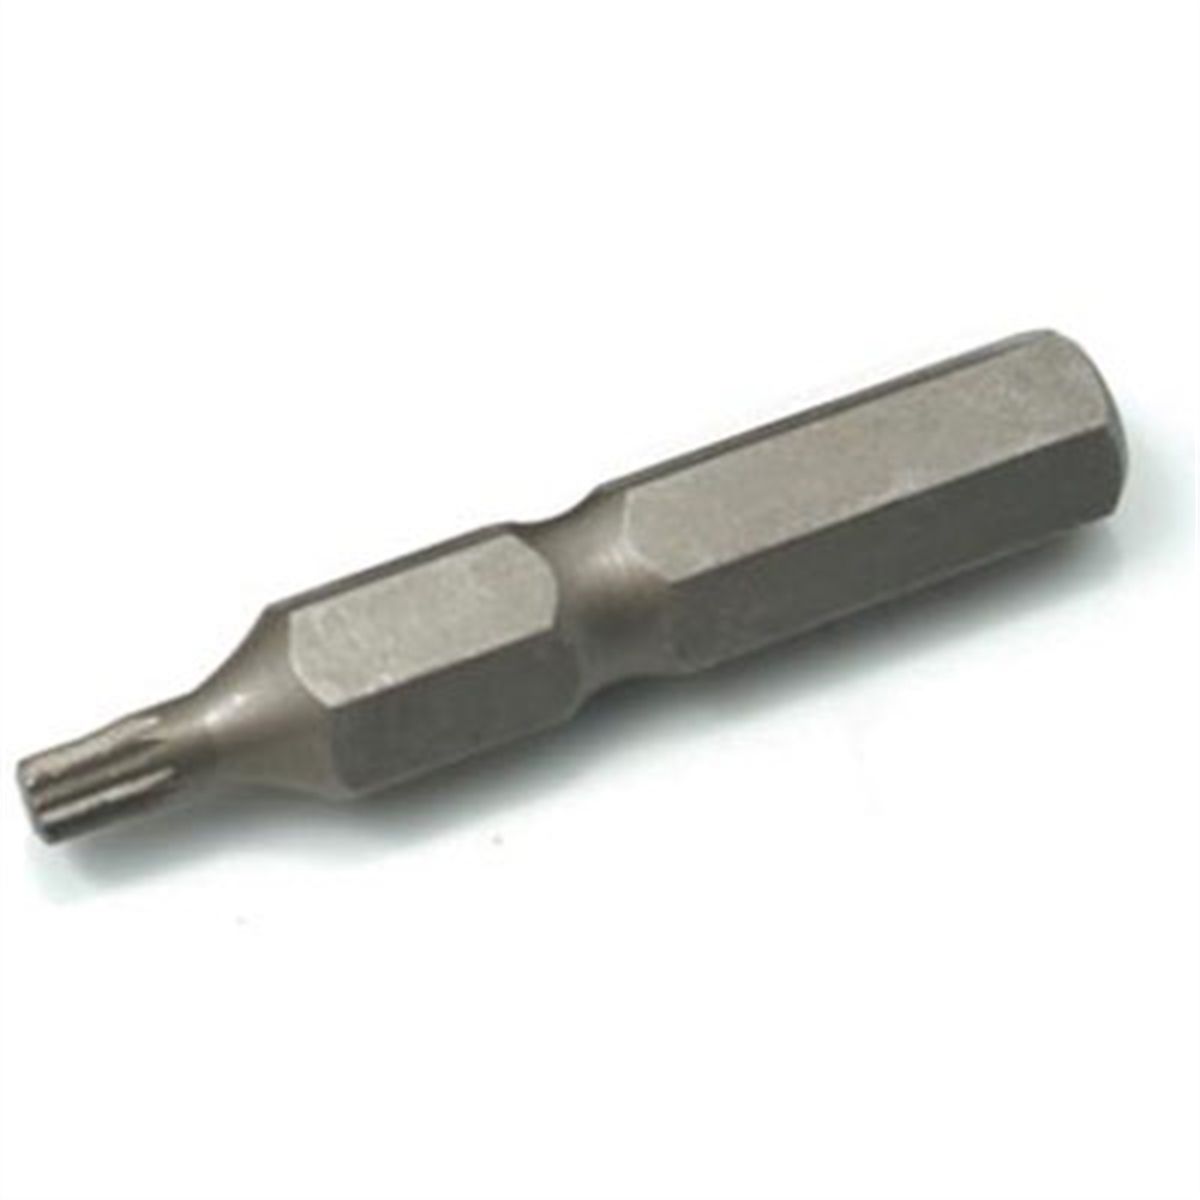 12 Pt Metric Wrench 6mm